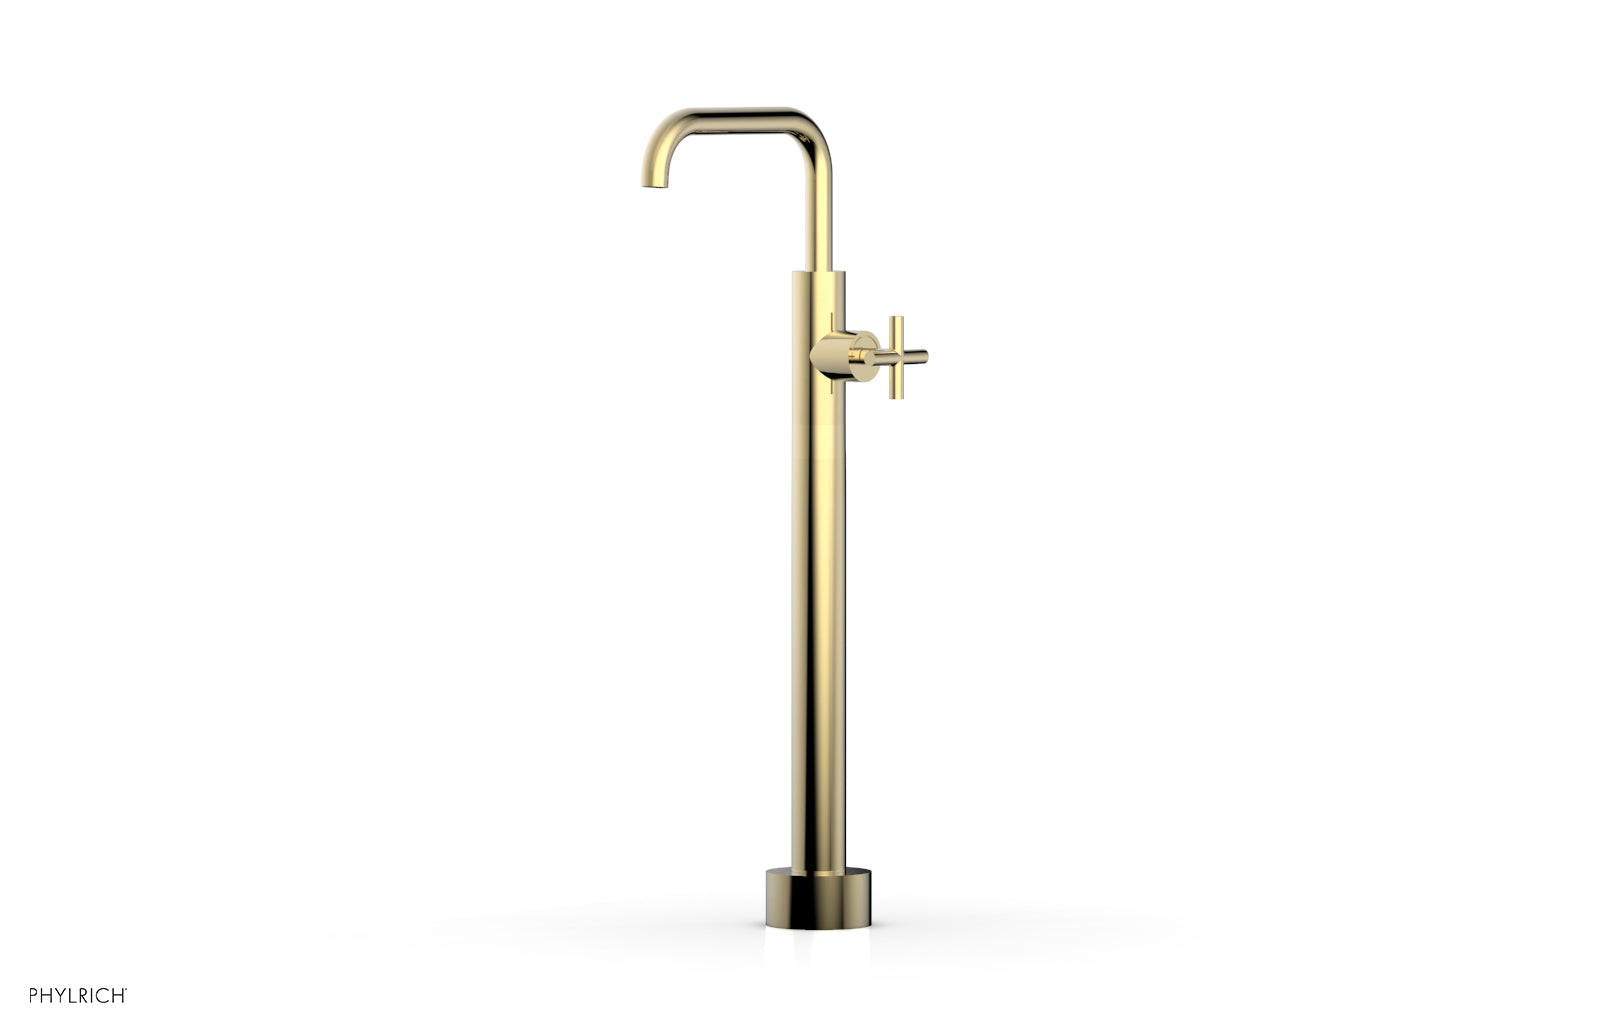 Phylrich TRANSITION Low Floor Mount Tub Filler - Cross Handle